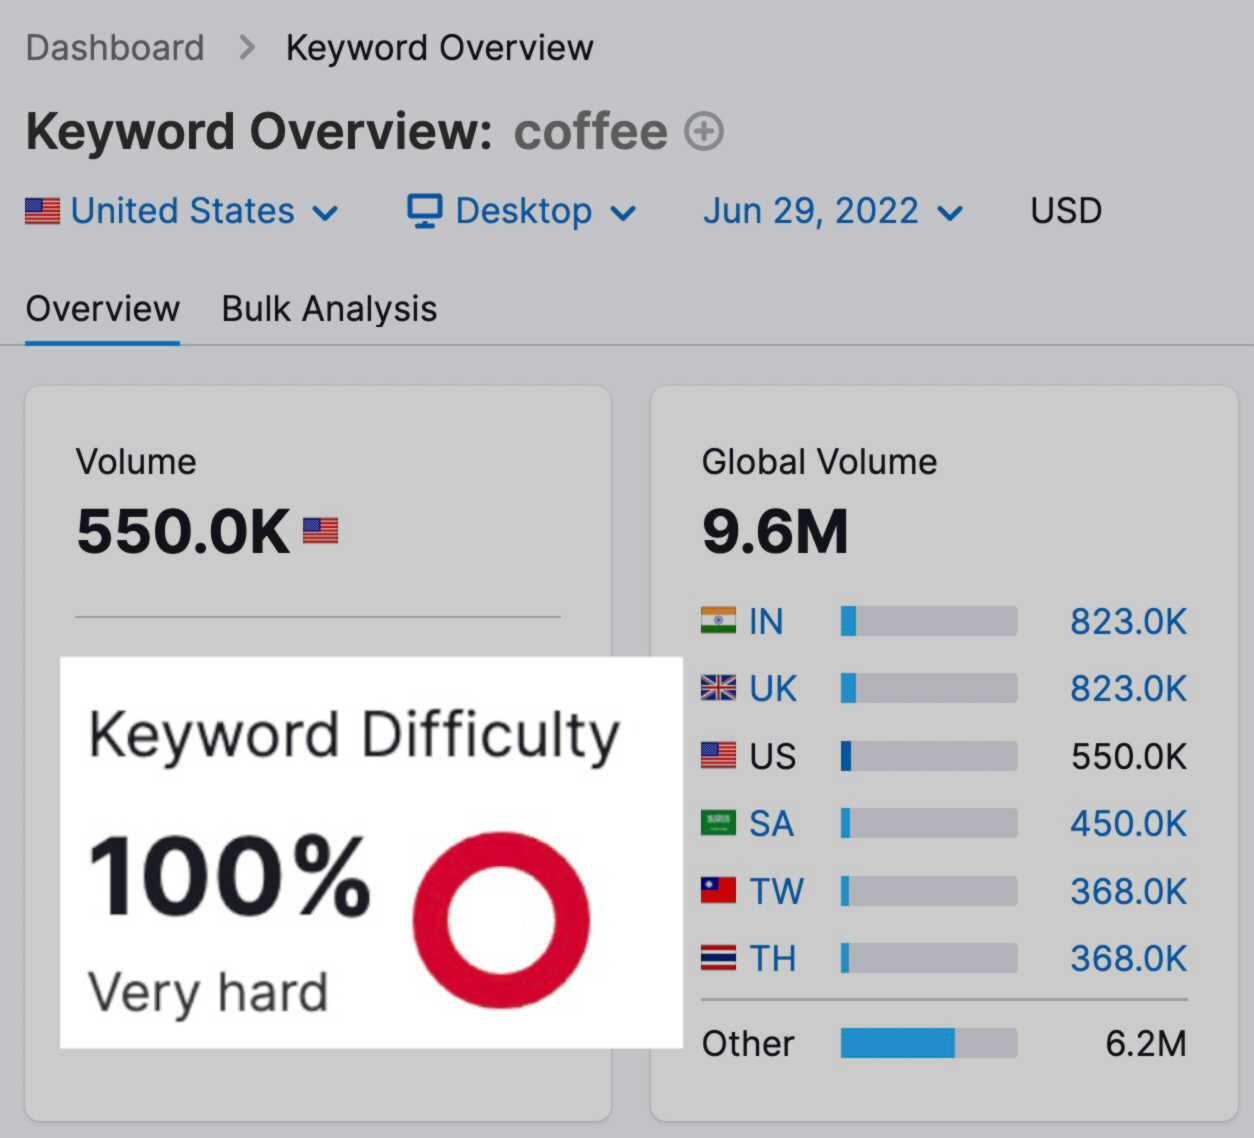 Keyword Overview results for "coffee"